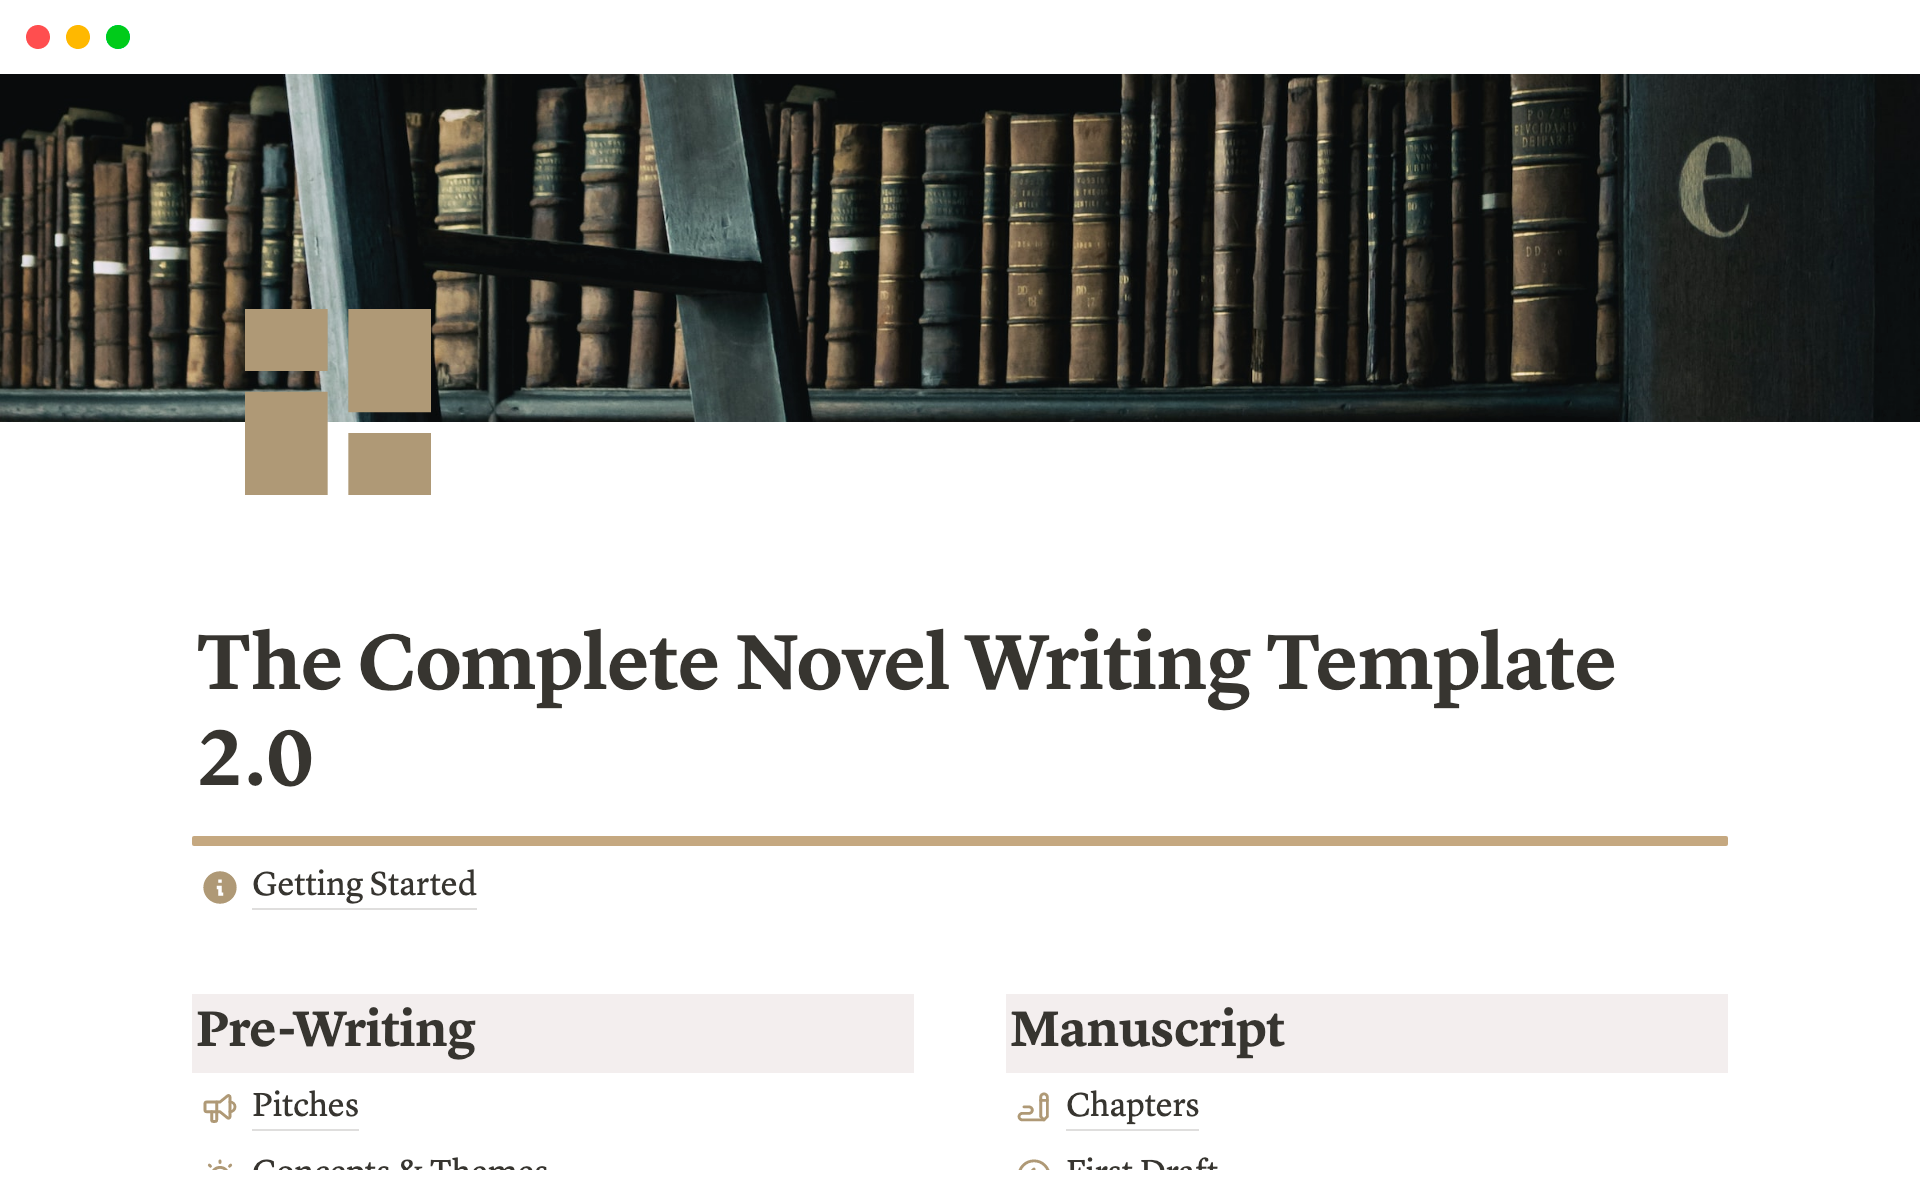 The Complete Novel Writing Template for Notion is a template pack designed to carry you through planning and drafting your next novel.